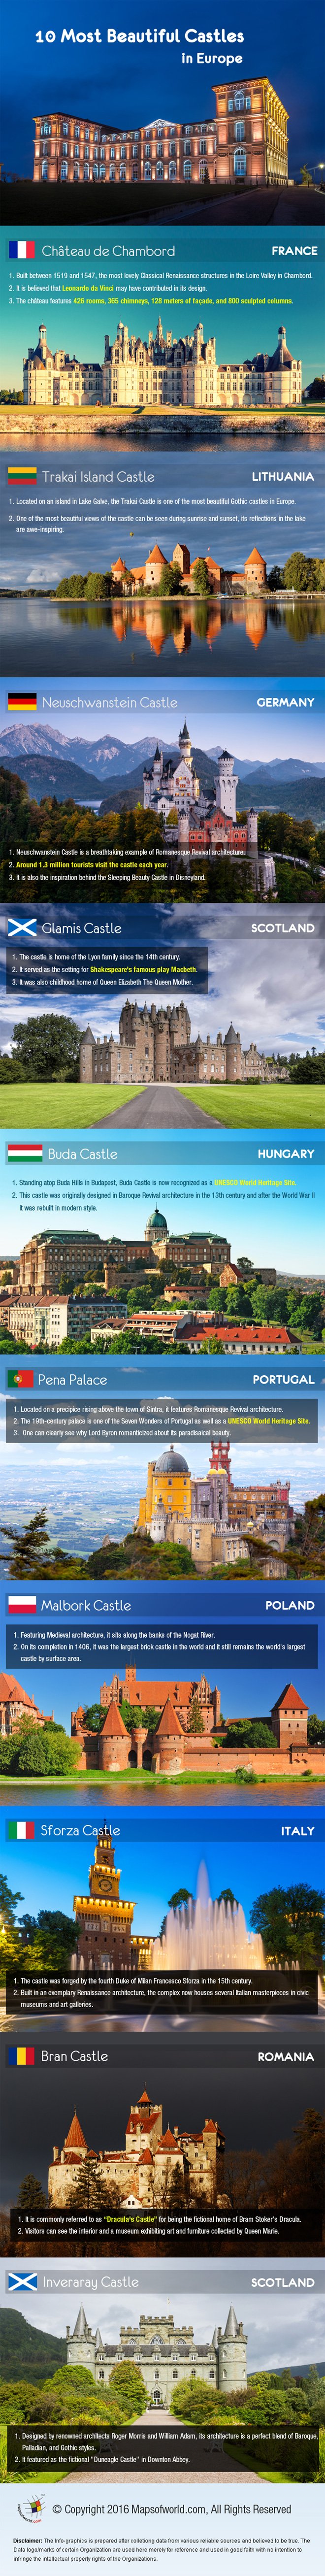 Infographic on 10 Most Beautiful Castles in Europe